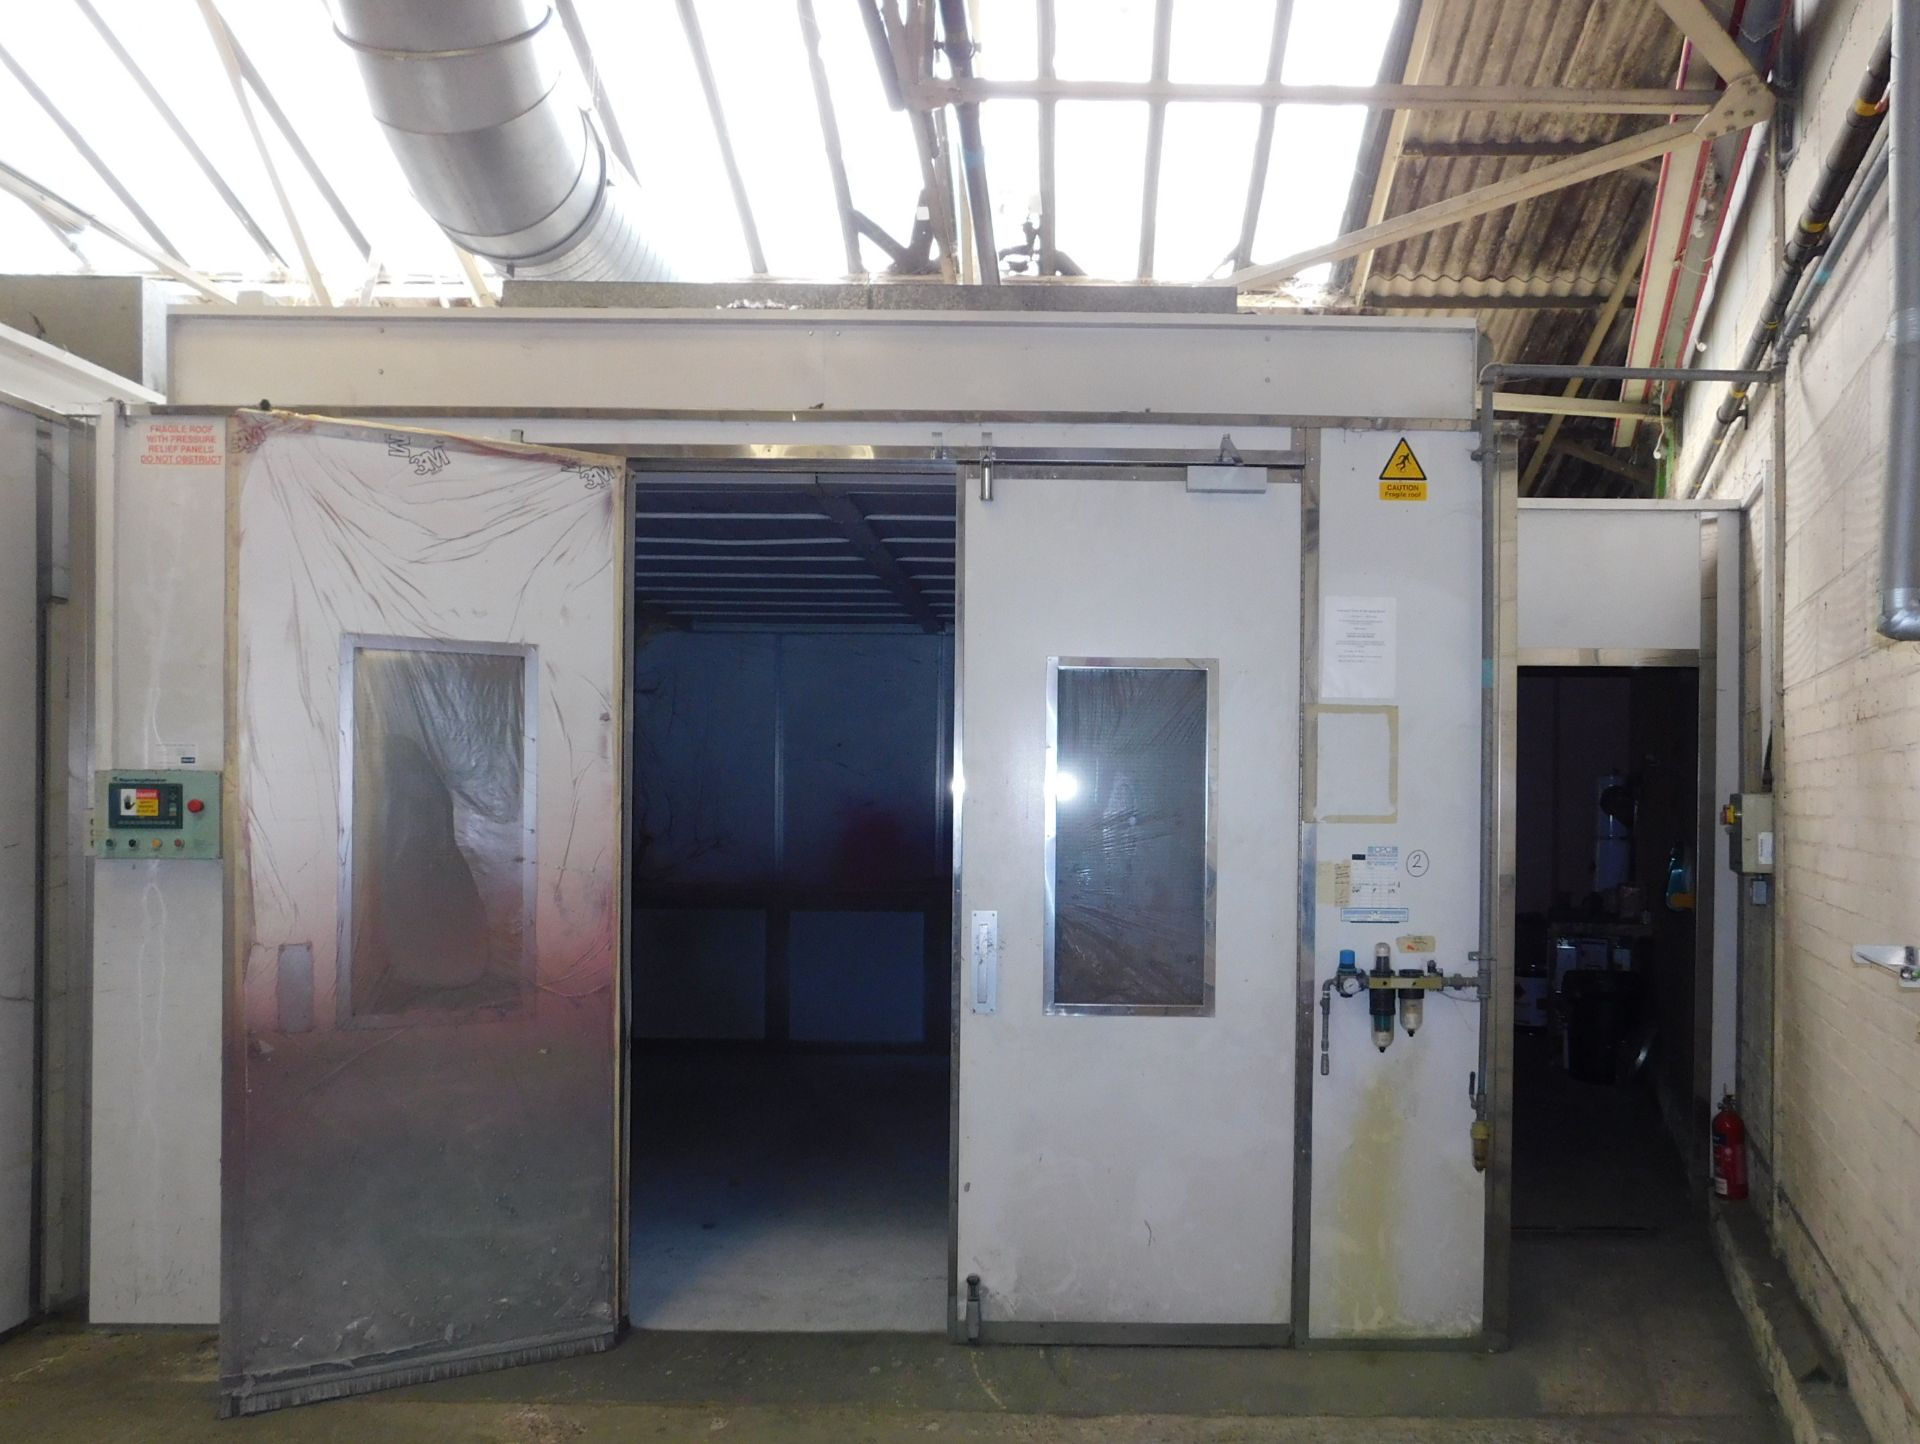 Spraybake Double Bay Spray Booth/Oven, Internal Dimensions, 4.2m X 6m & 4.2m X 4.9m with Adjoining - Image 3 of 6